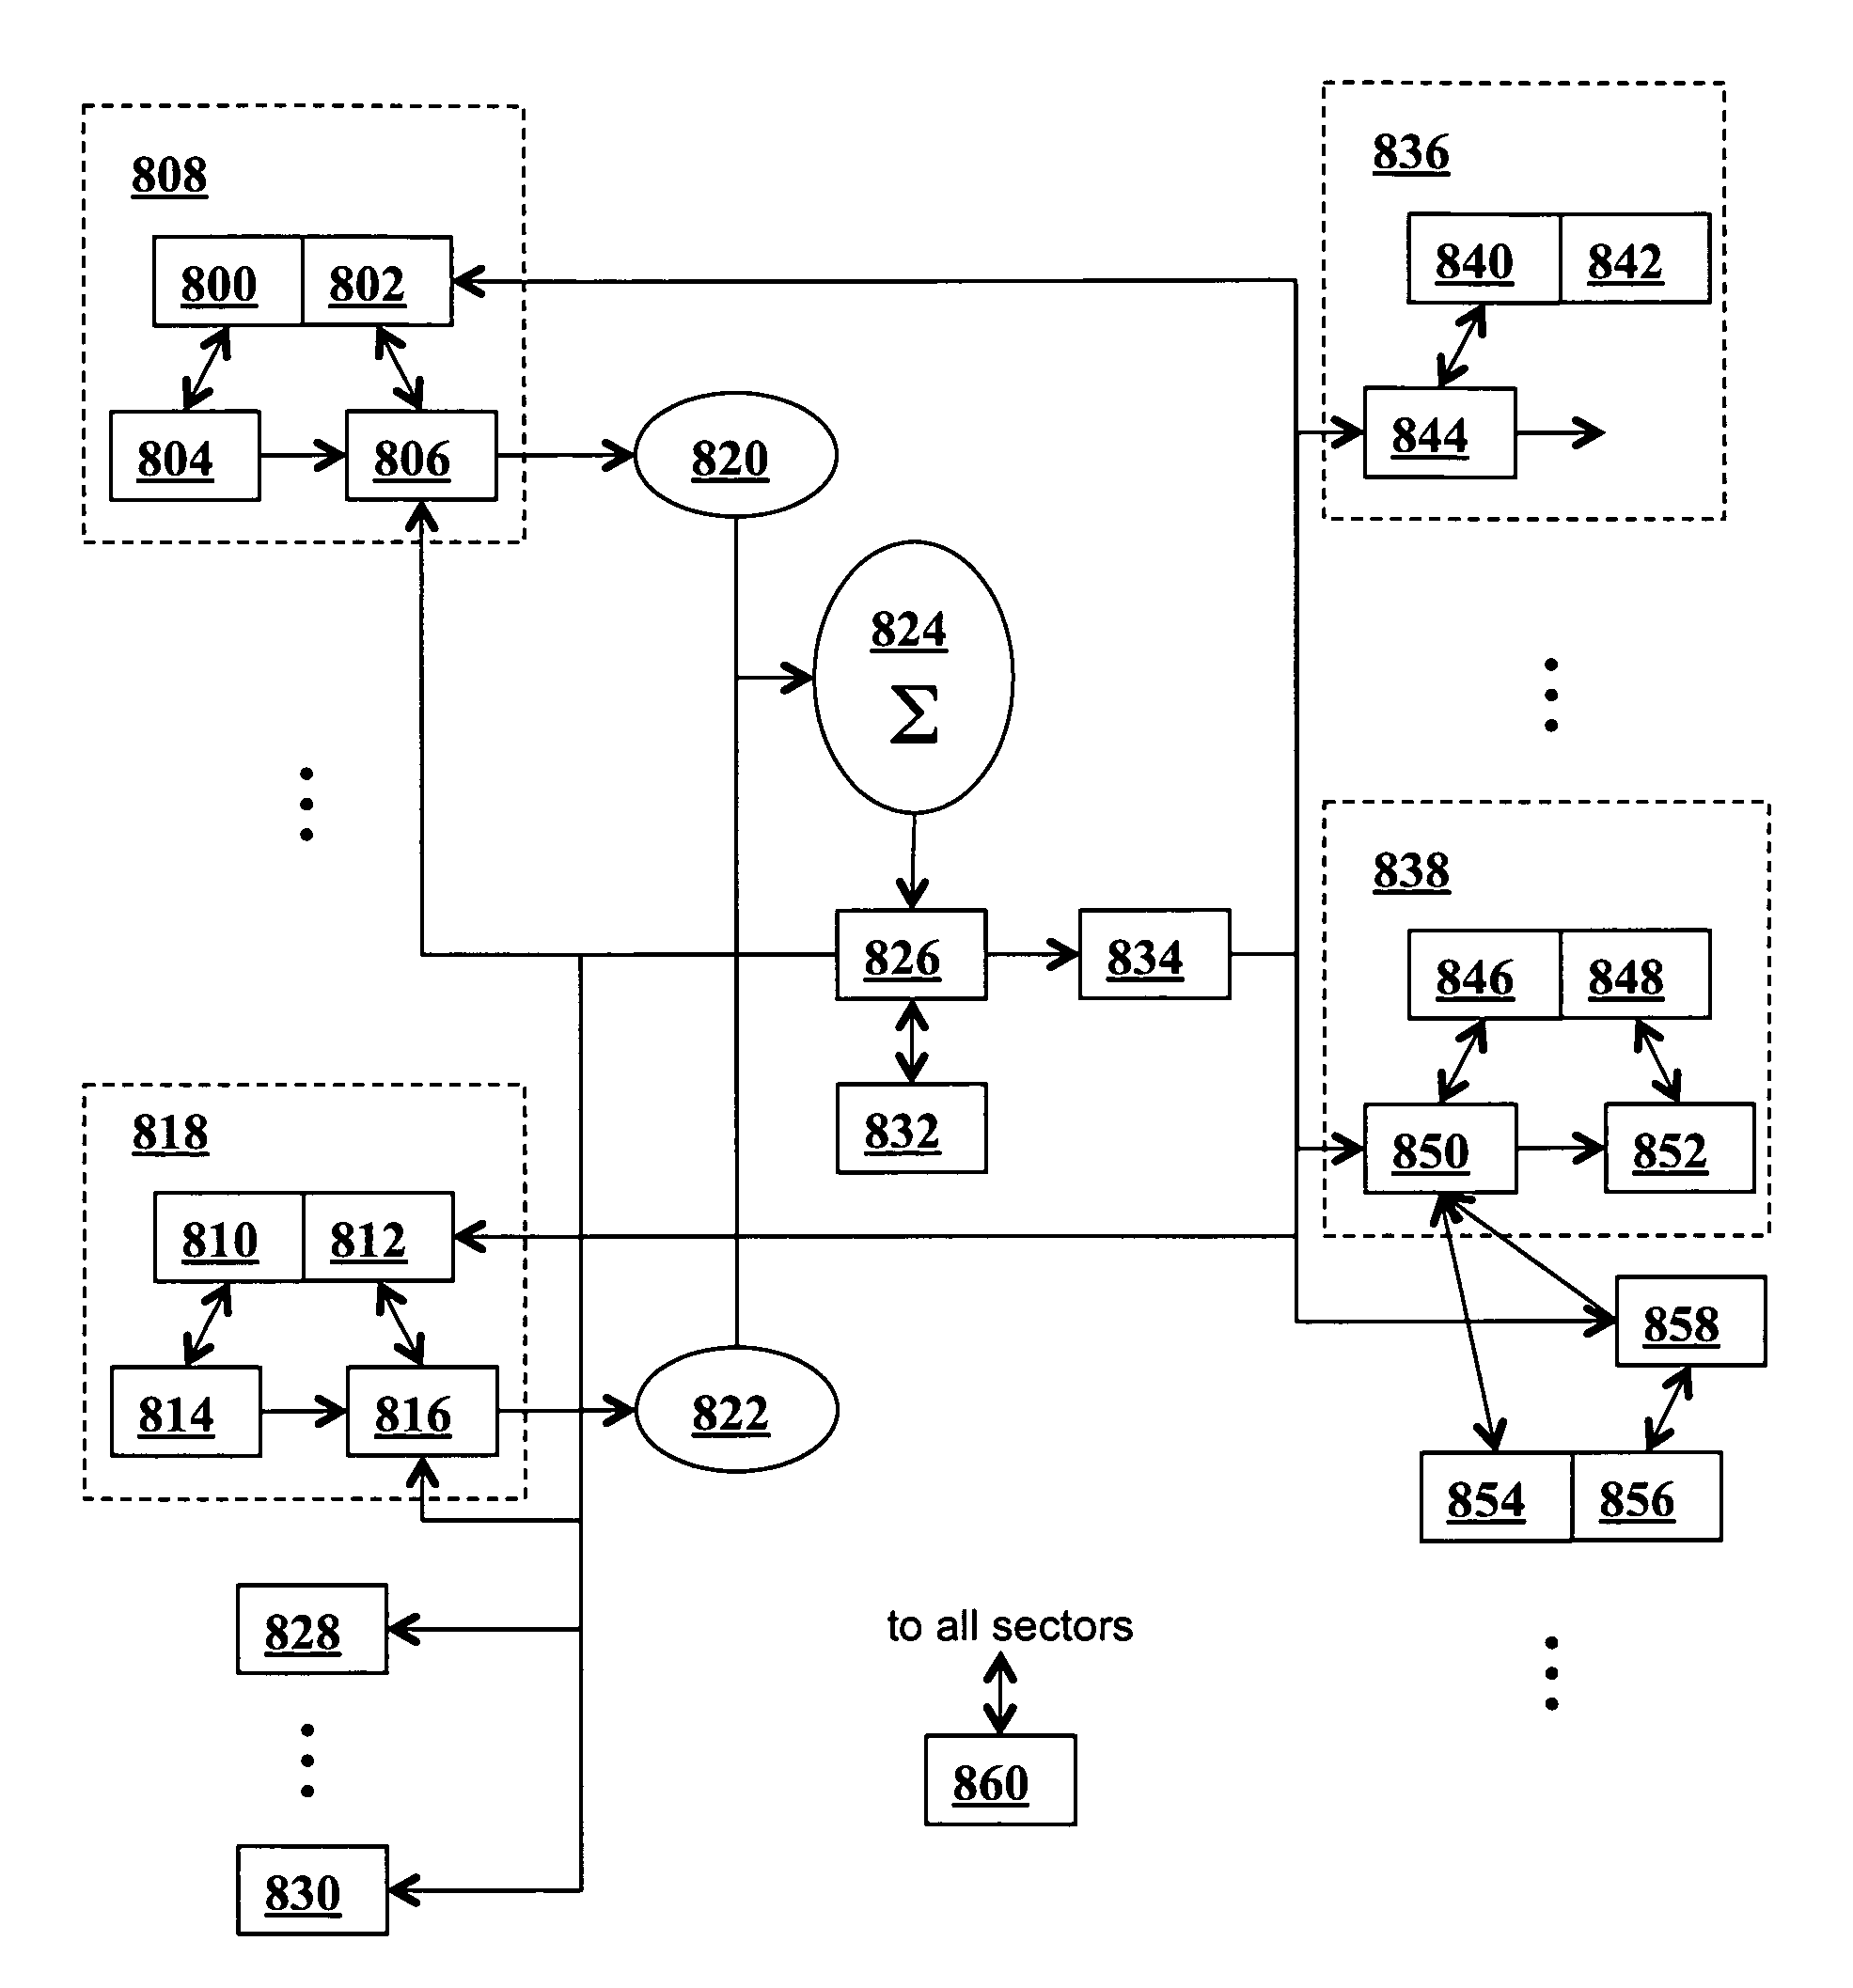 Method for efficiently simulating the information processing in cells and tissues of the nervous system with a temporal series compressed encoding neural network